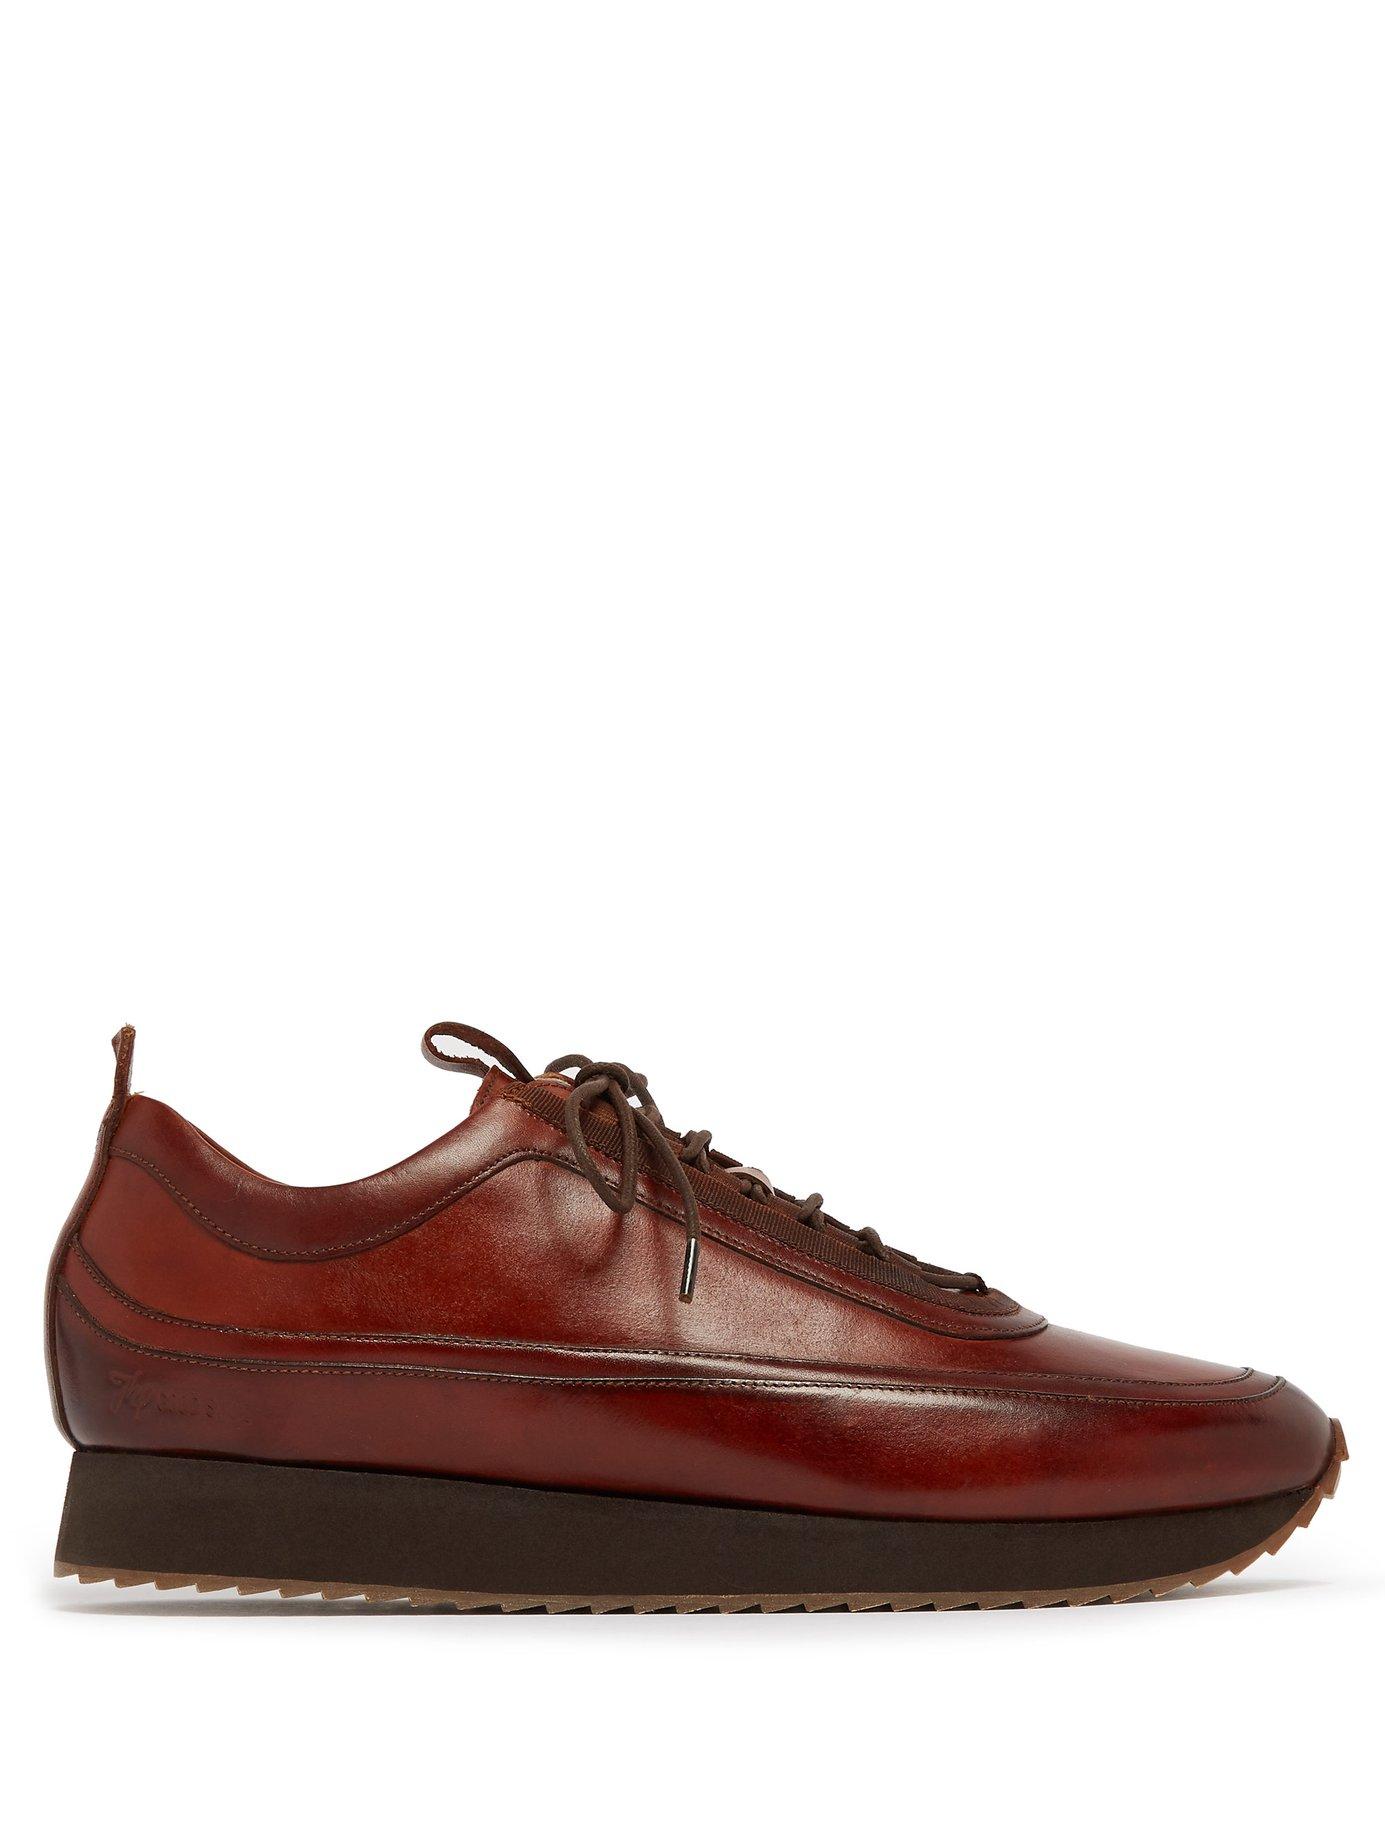 Grenson Sneaker 12 Leather Trainers in Brown for Men - Lyst